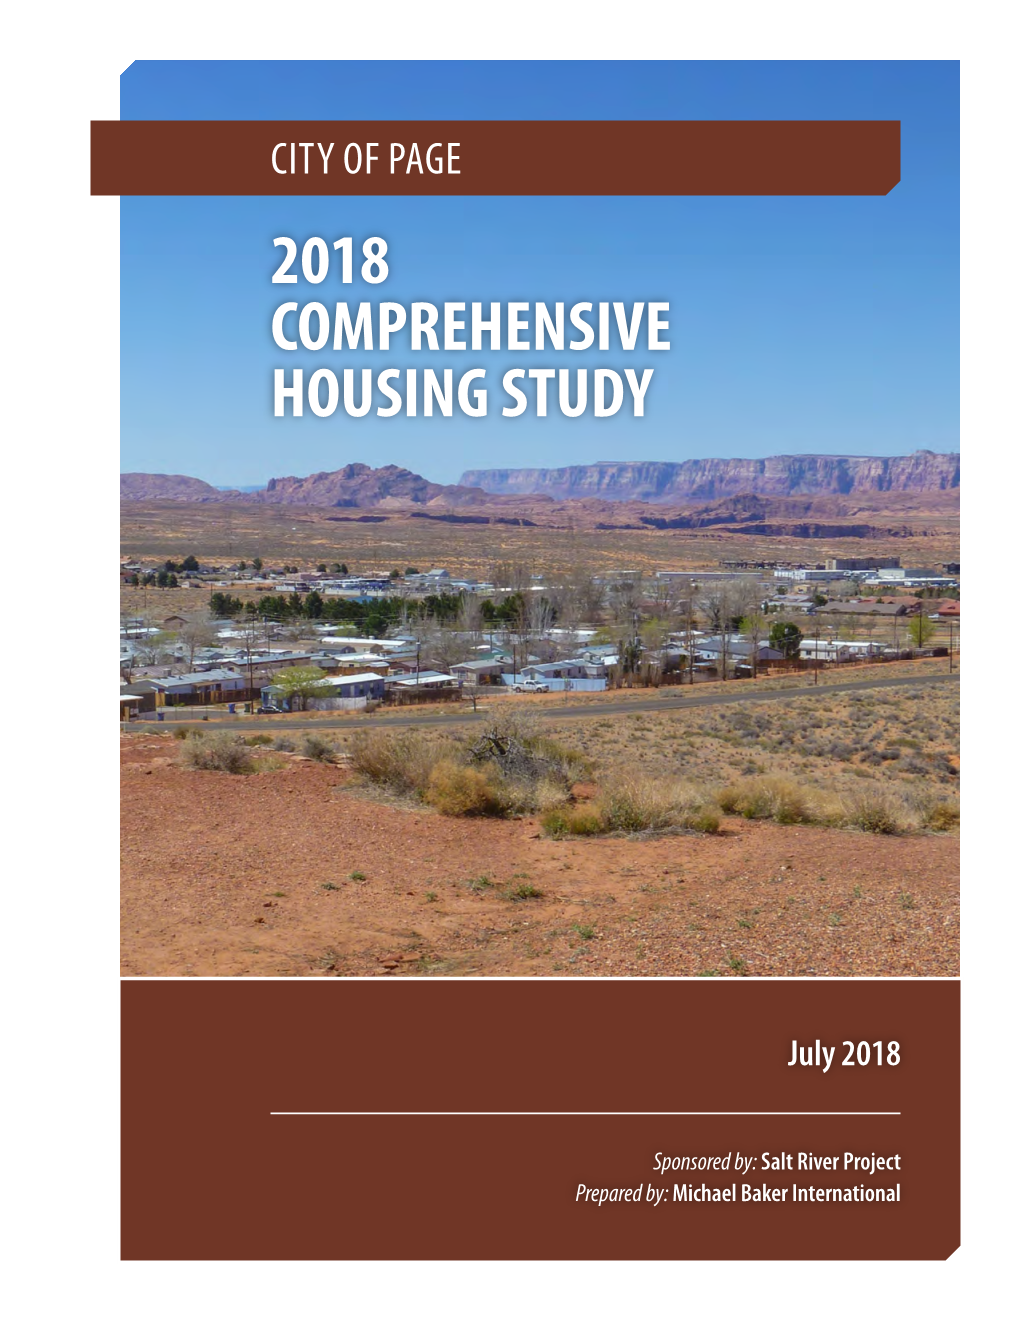 City of Page 2018 Comprehensive Housing Study